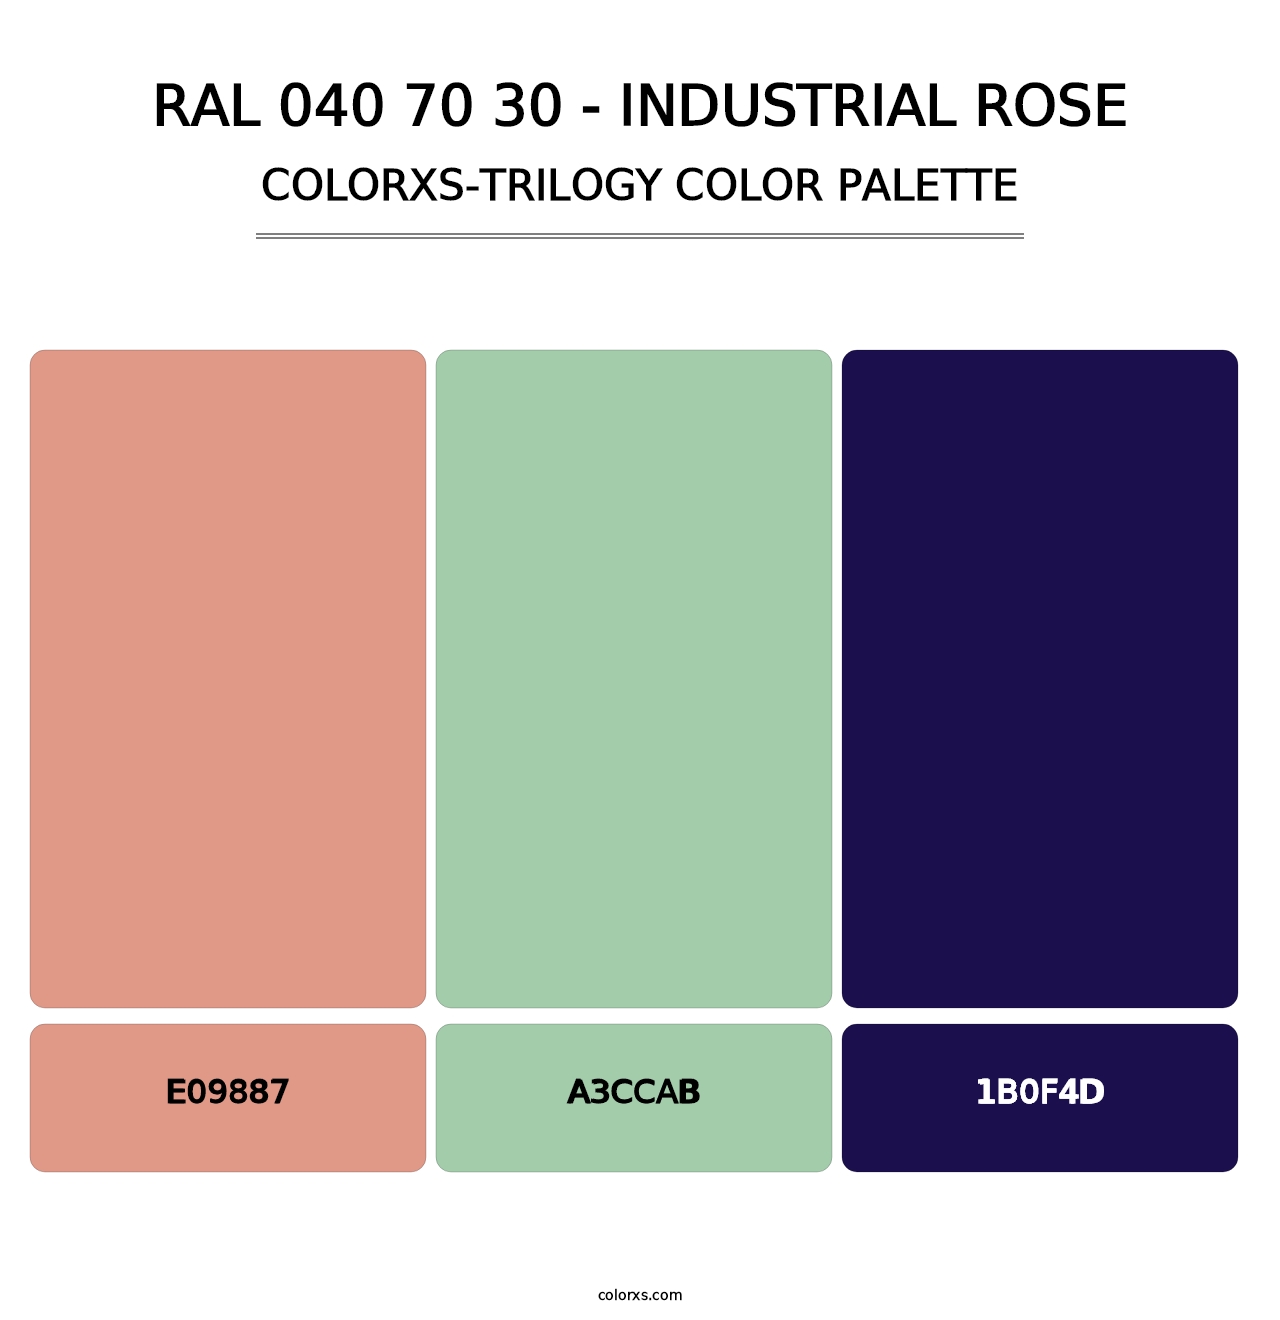 RAL 040 70 30 - Industrial Rose - Colorxs Trilogy Palette